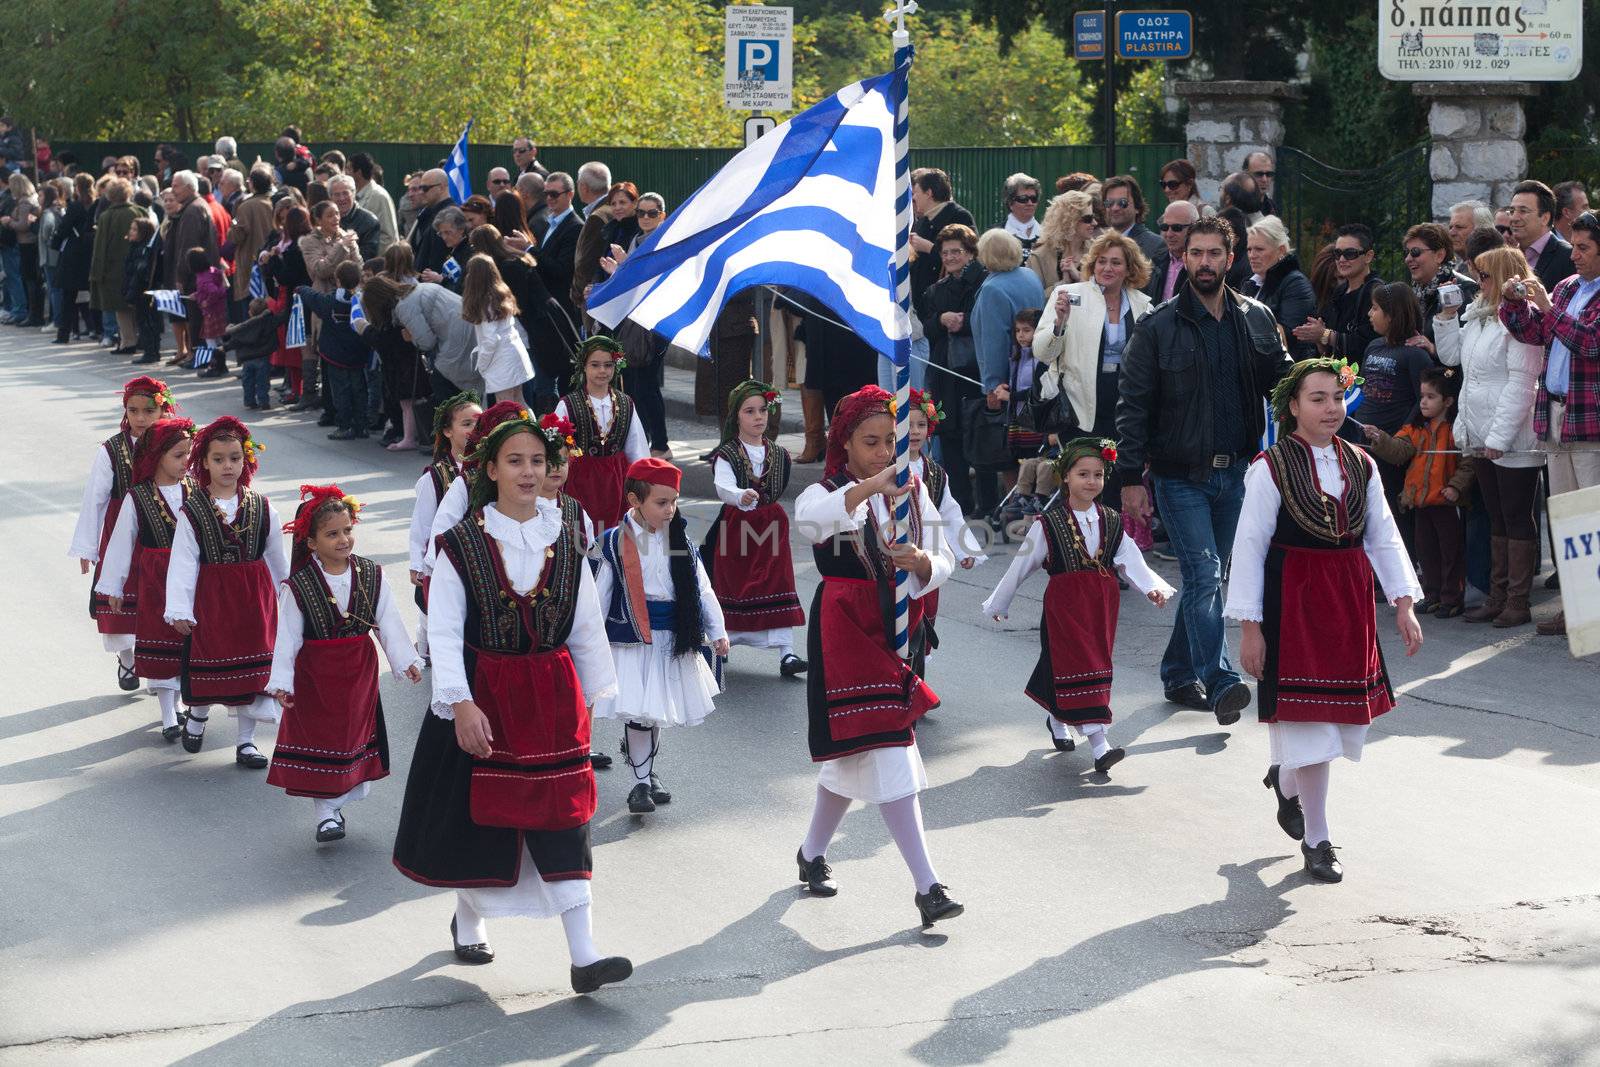 Parade to celebrate the anniversary of 1940 by Portokalis